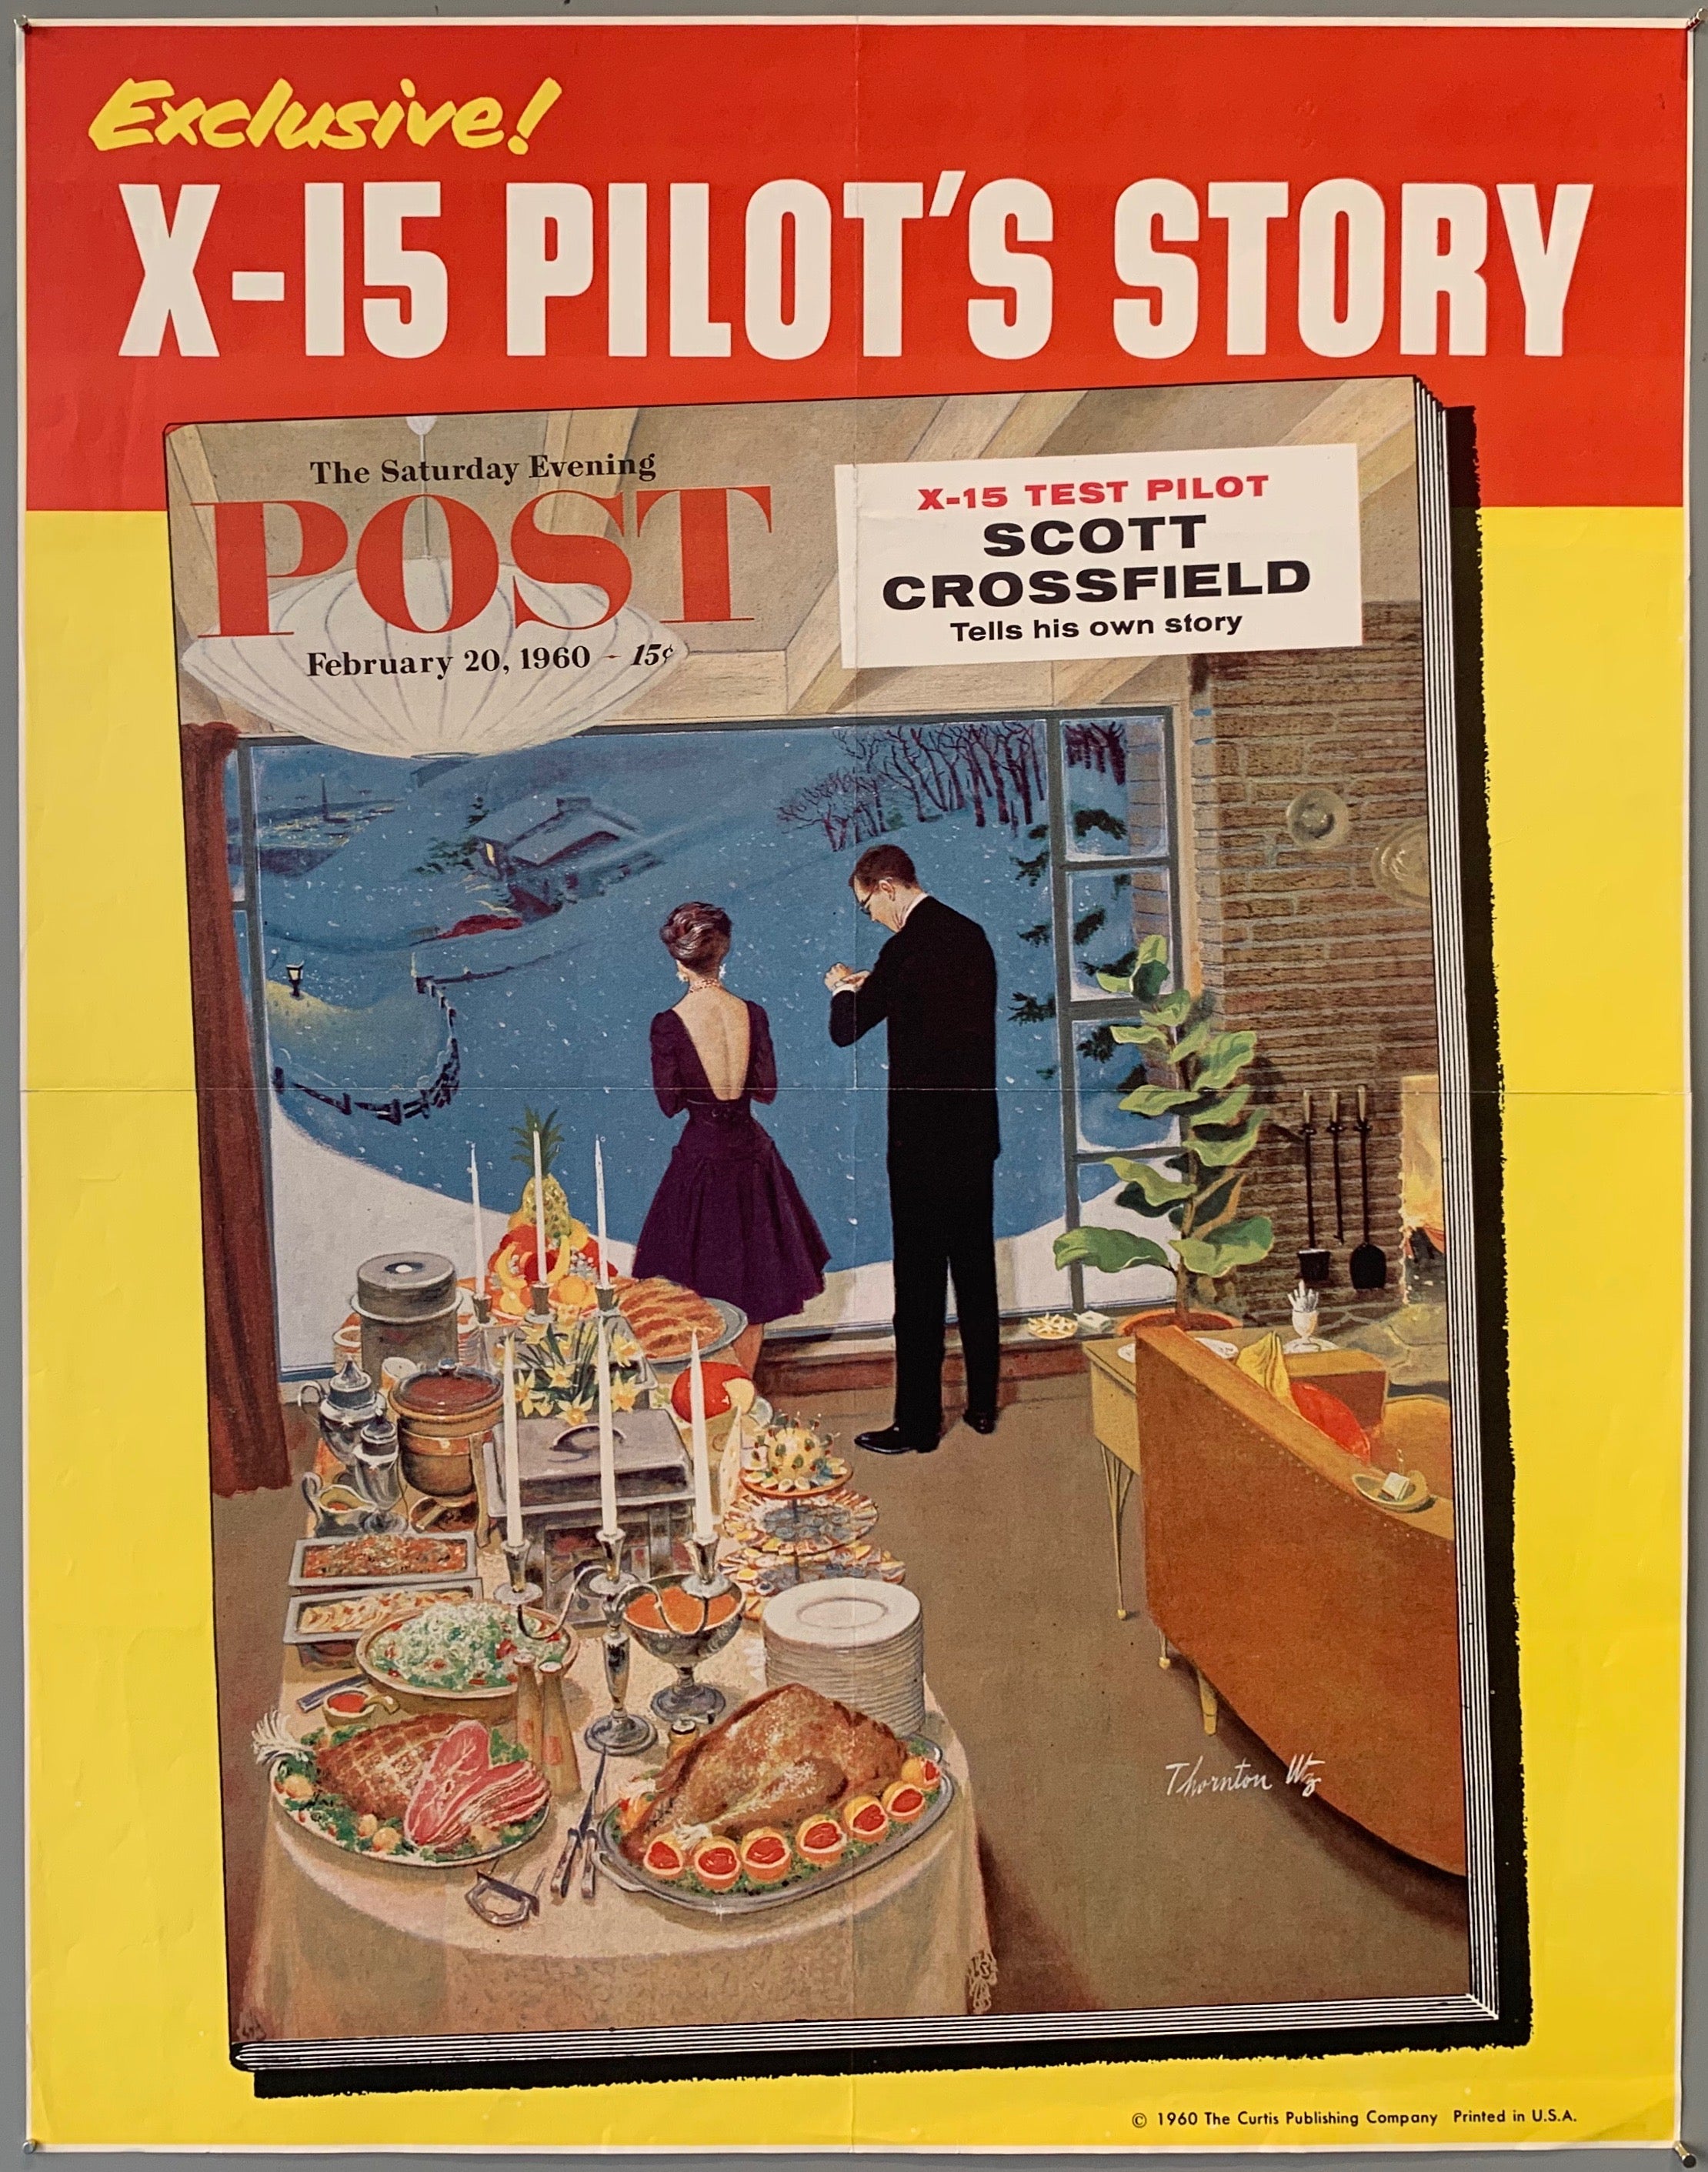 The Saturday Evening Post - February 20, 1960